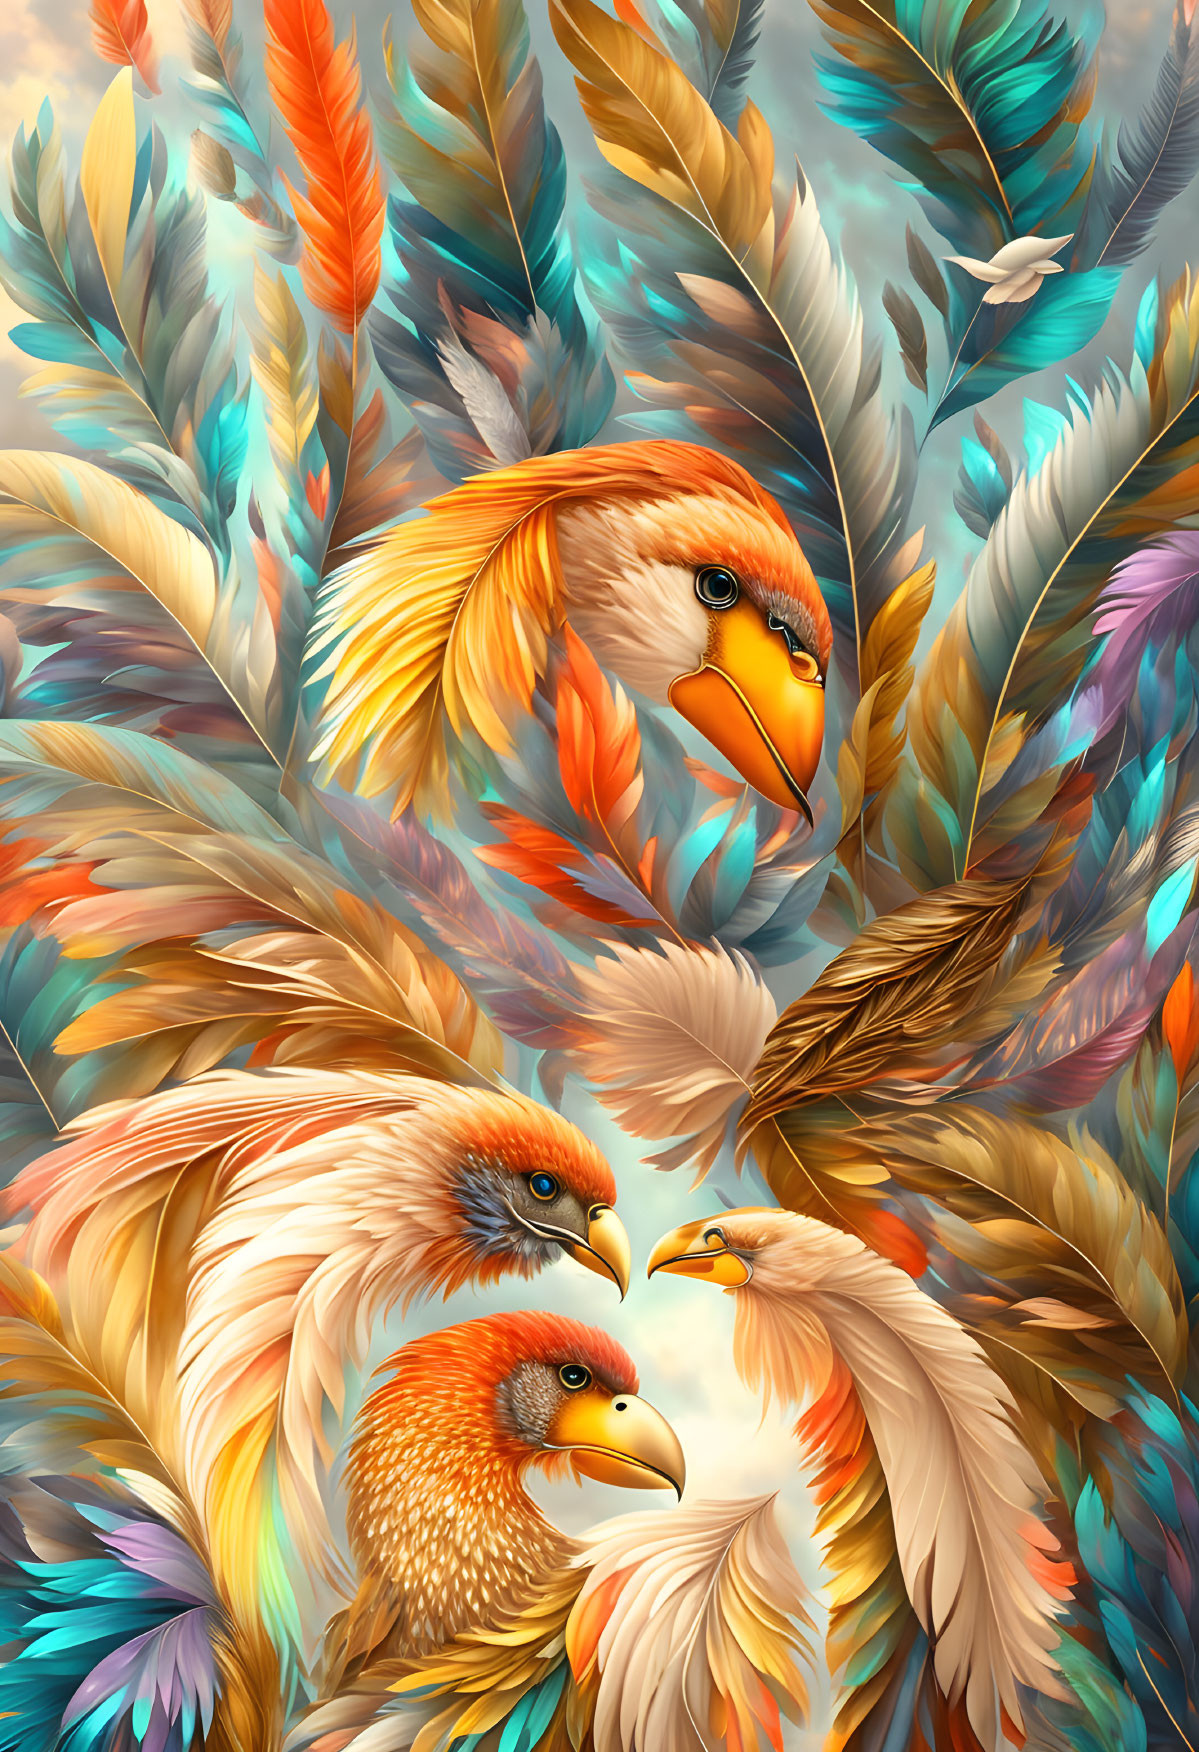 Colorful Stylized Birds Among Multicolored Feathers